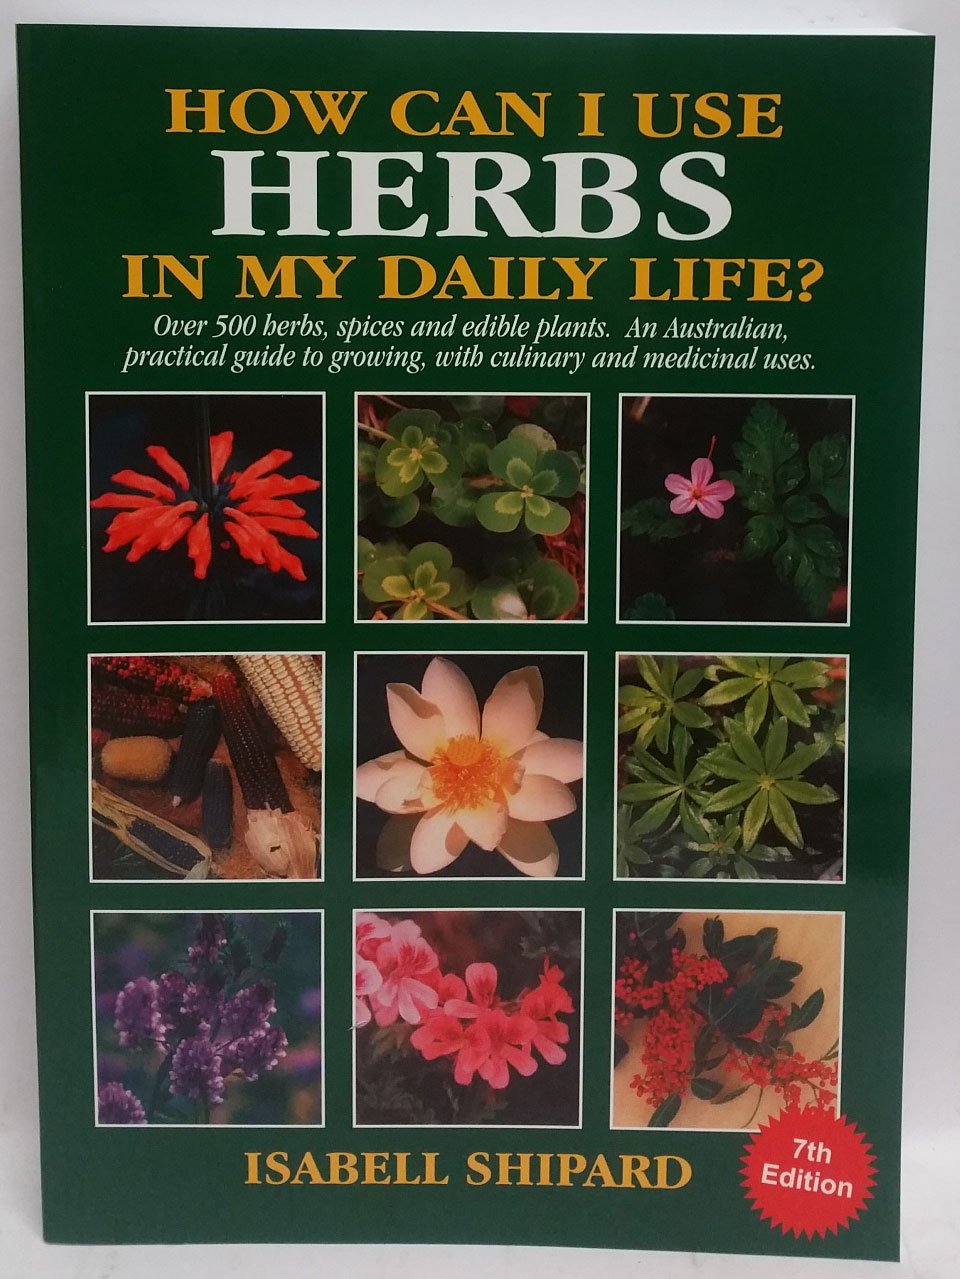 How Can I Use Herbs in My Daily Life? by Isabell Shipard